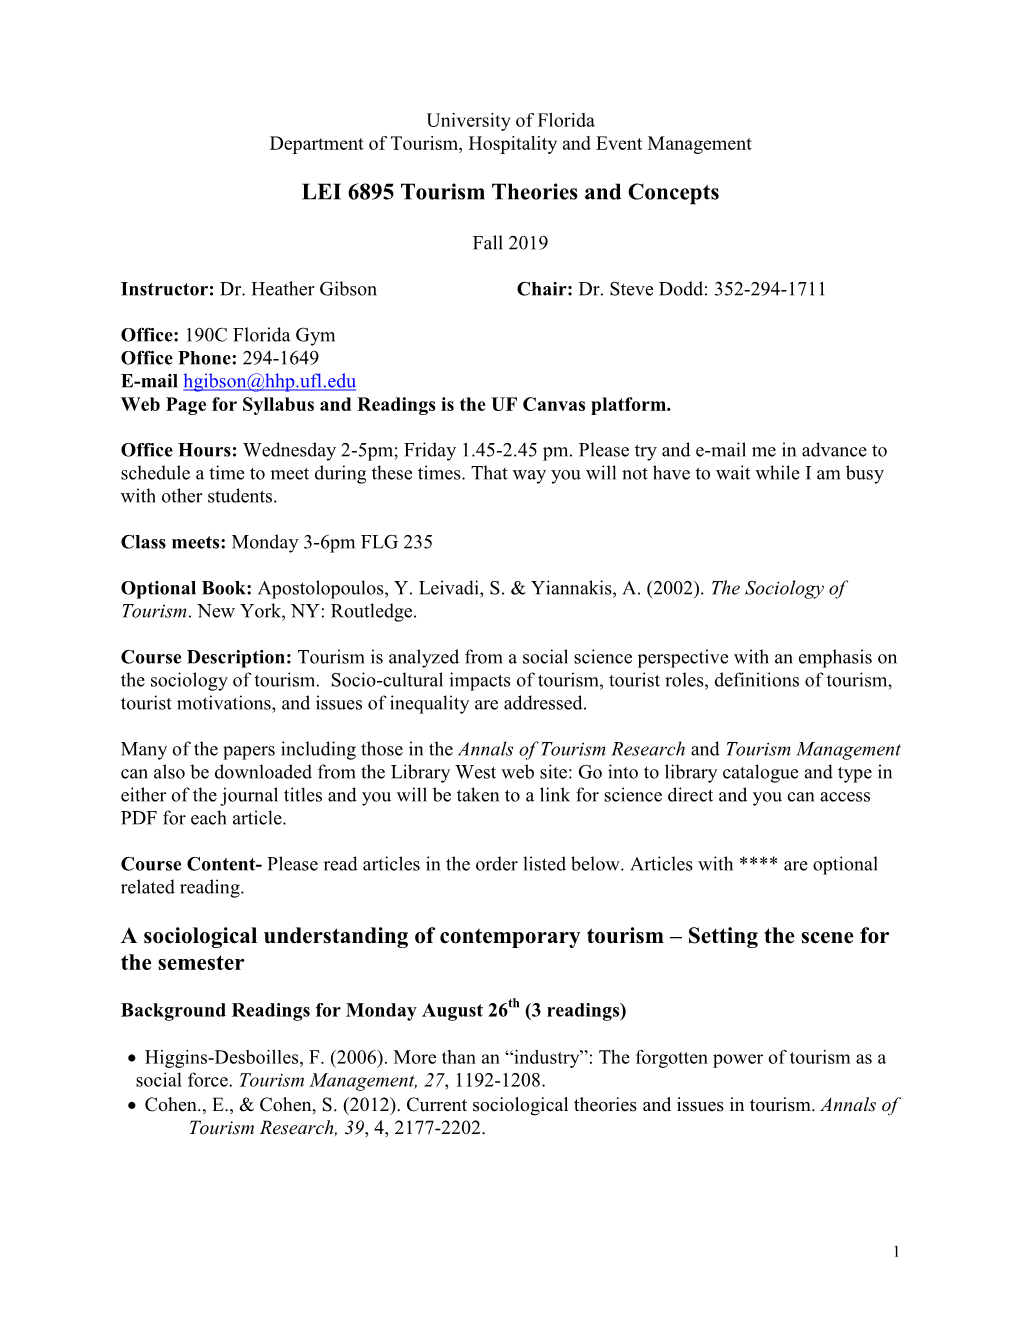 LEI 6895 Tourism Theories and Concepts